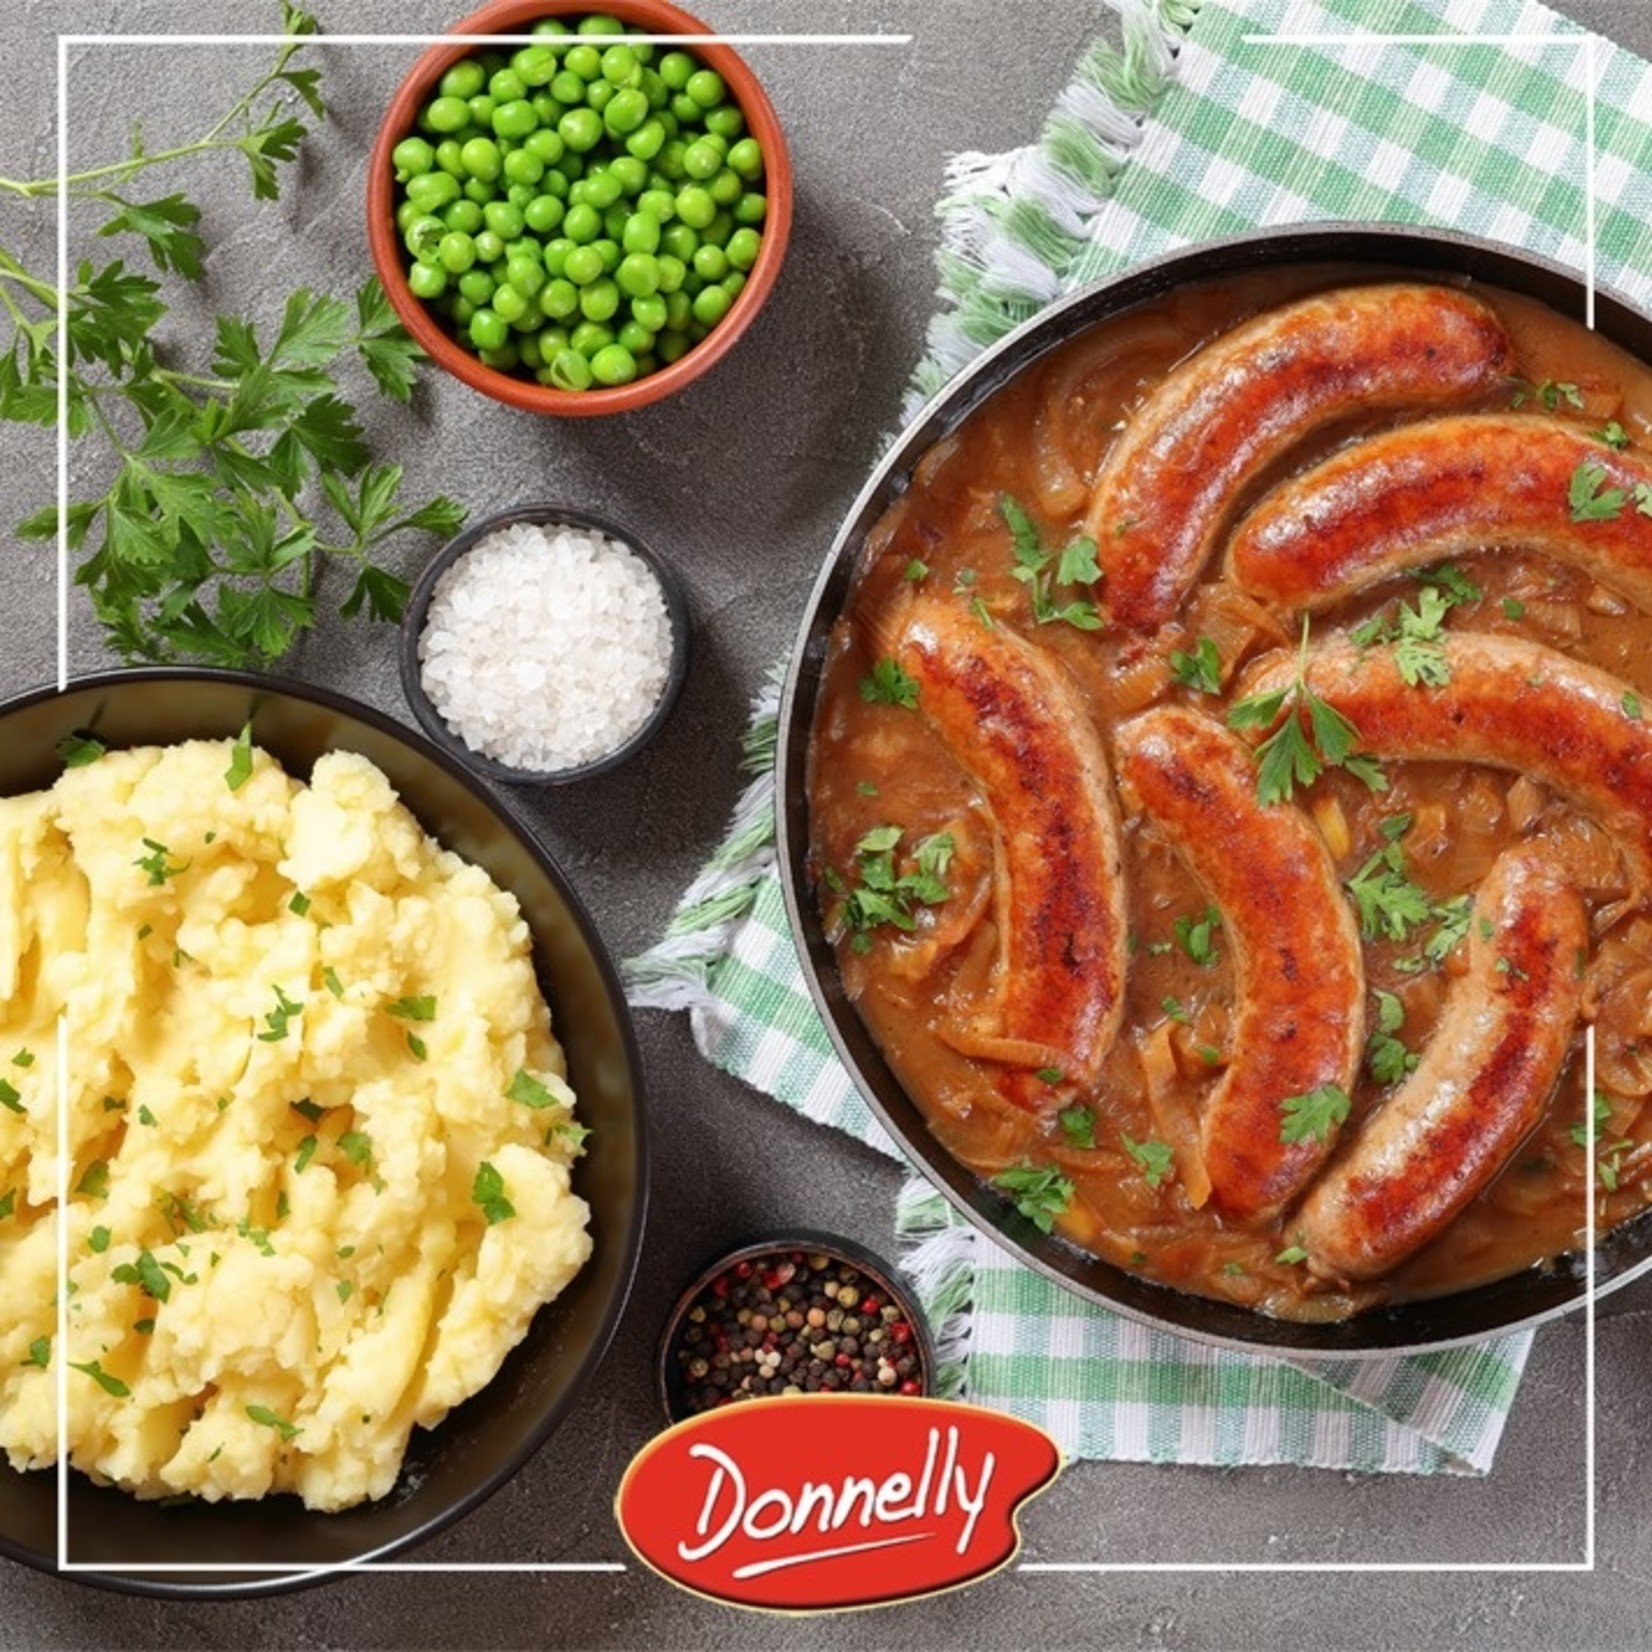 Donnelly Donnelly Original Breakfast Sausages 16oz